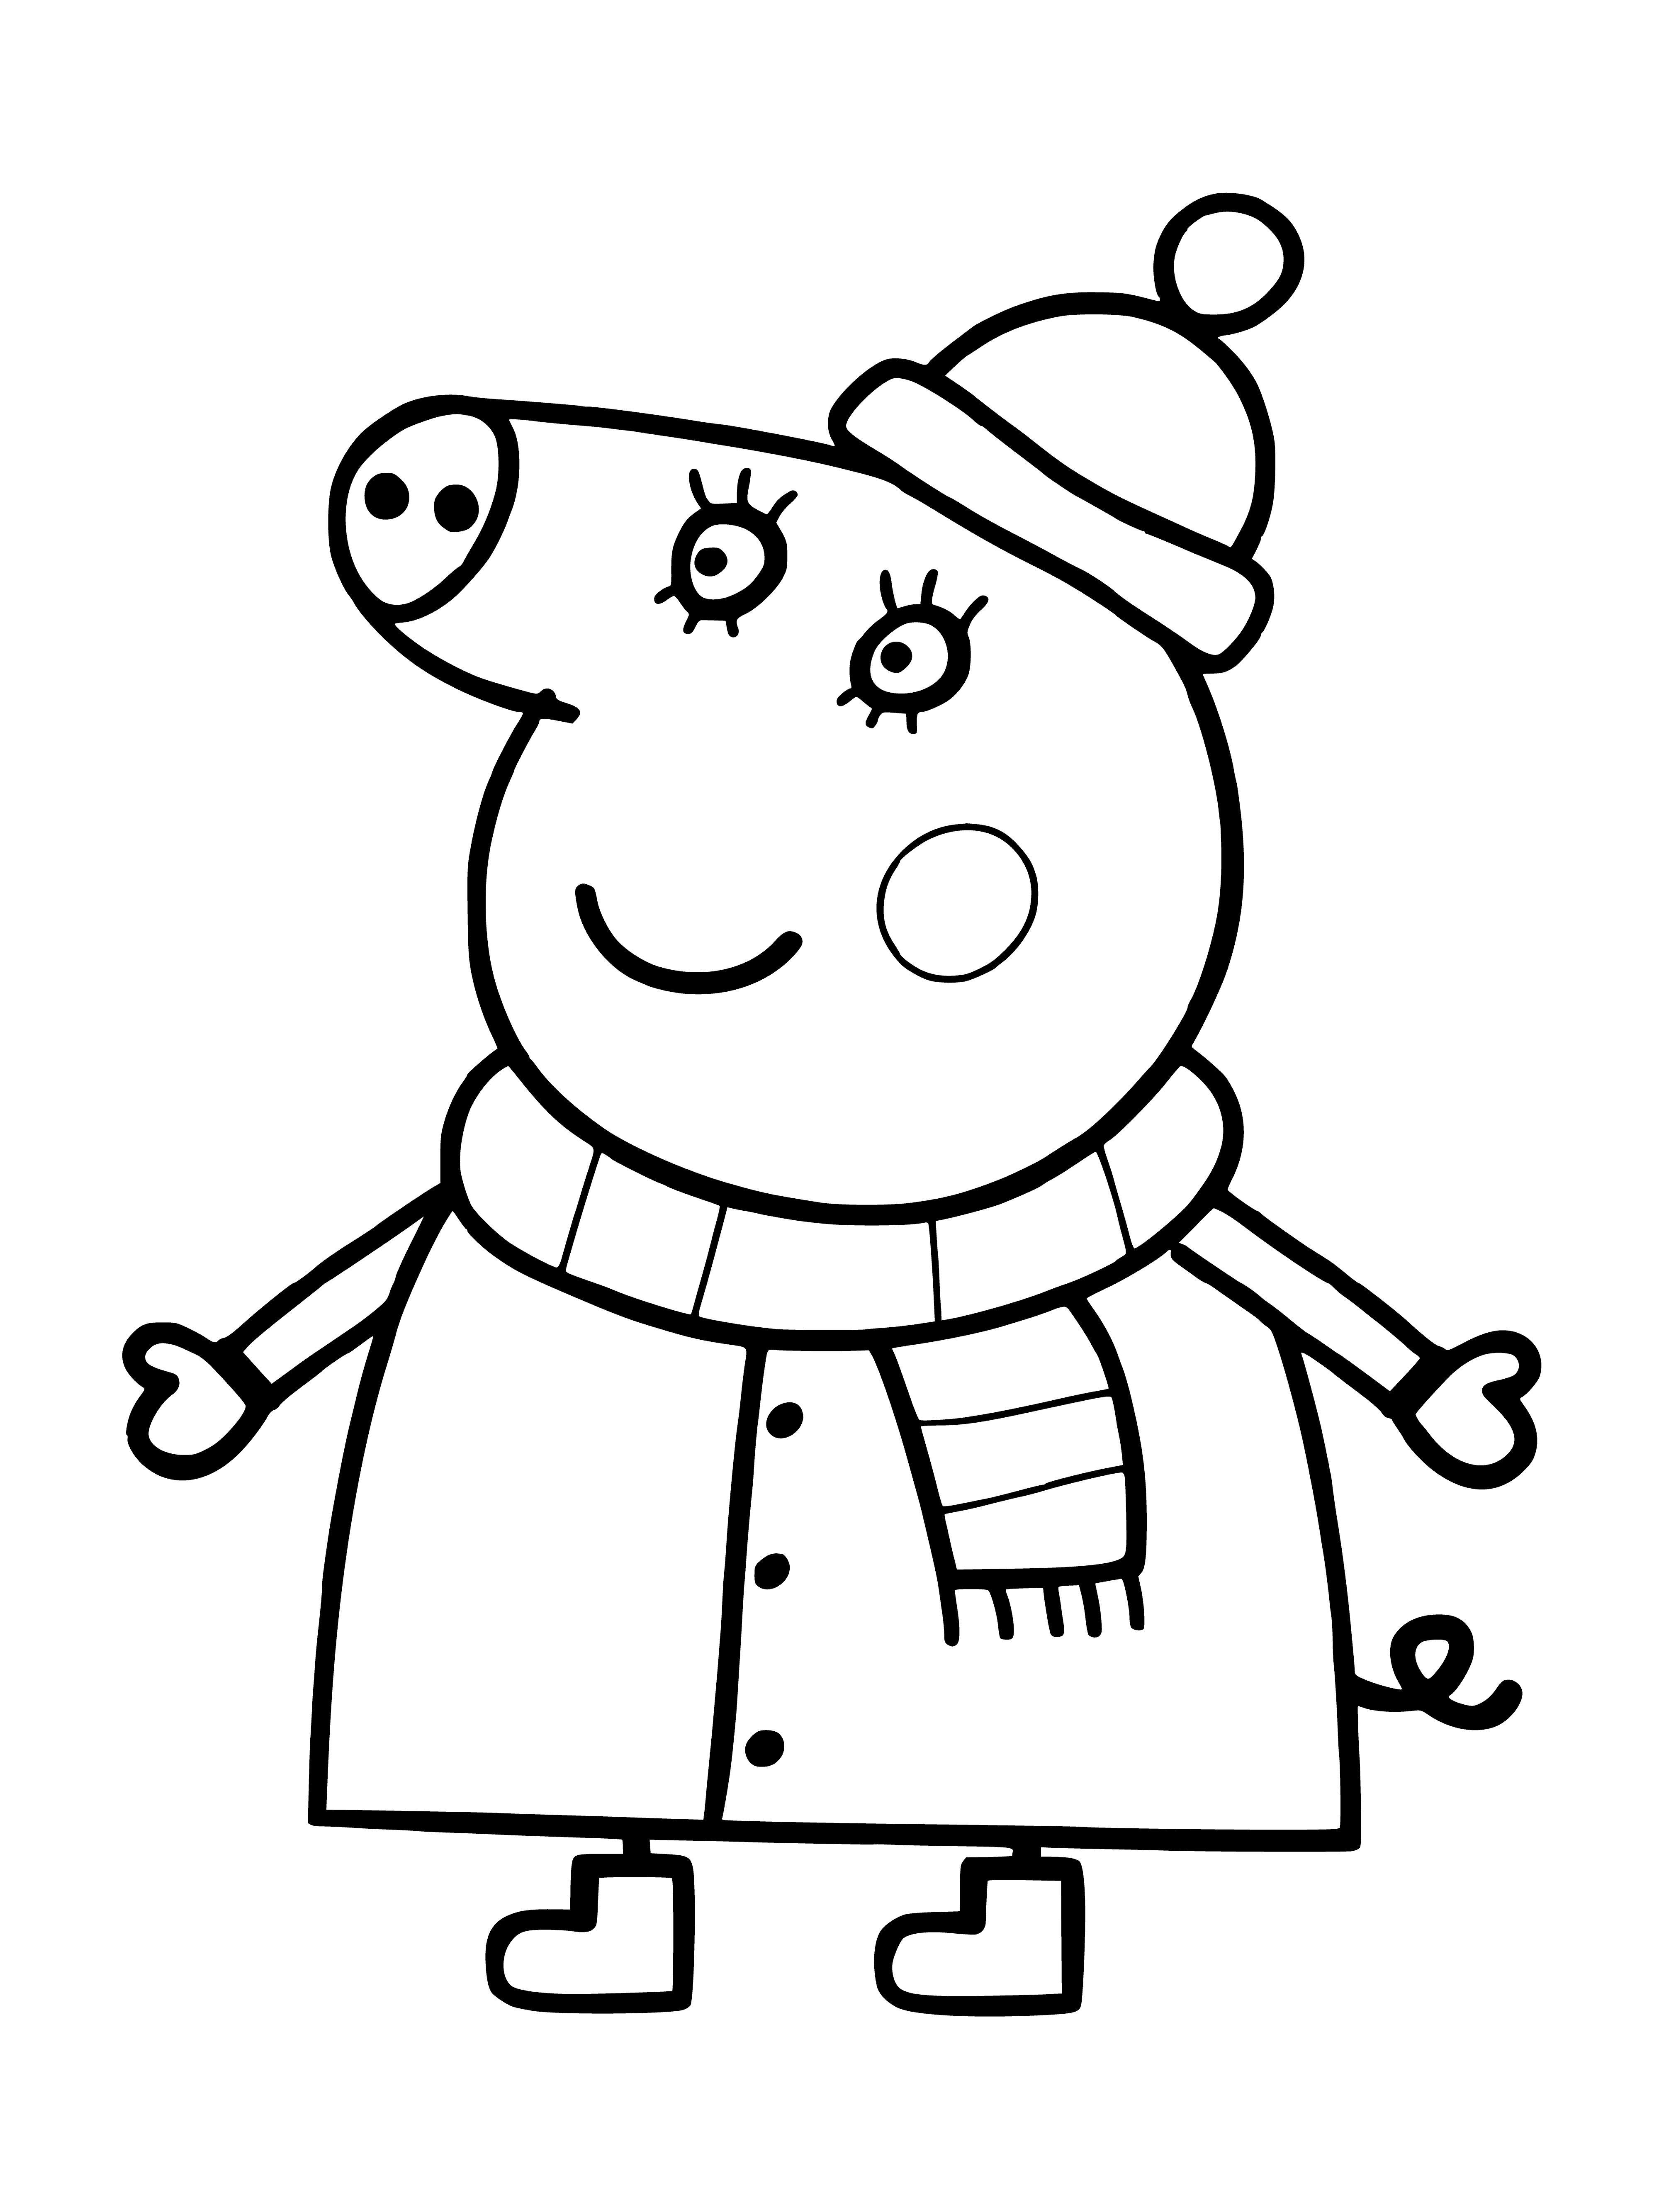 coloring page: Mom Pig is bundled up in the snow to keep warm, standing in front of a cozy winter home.